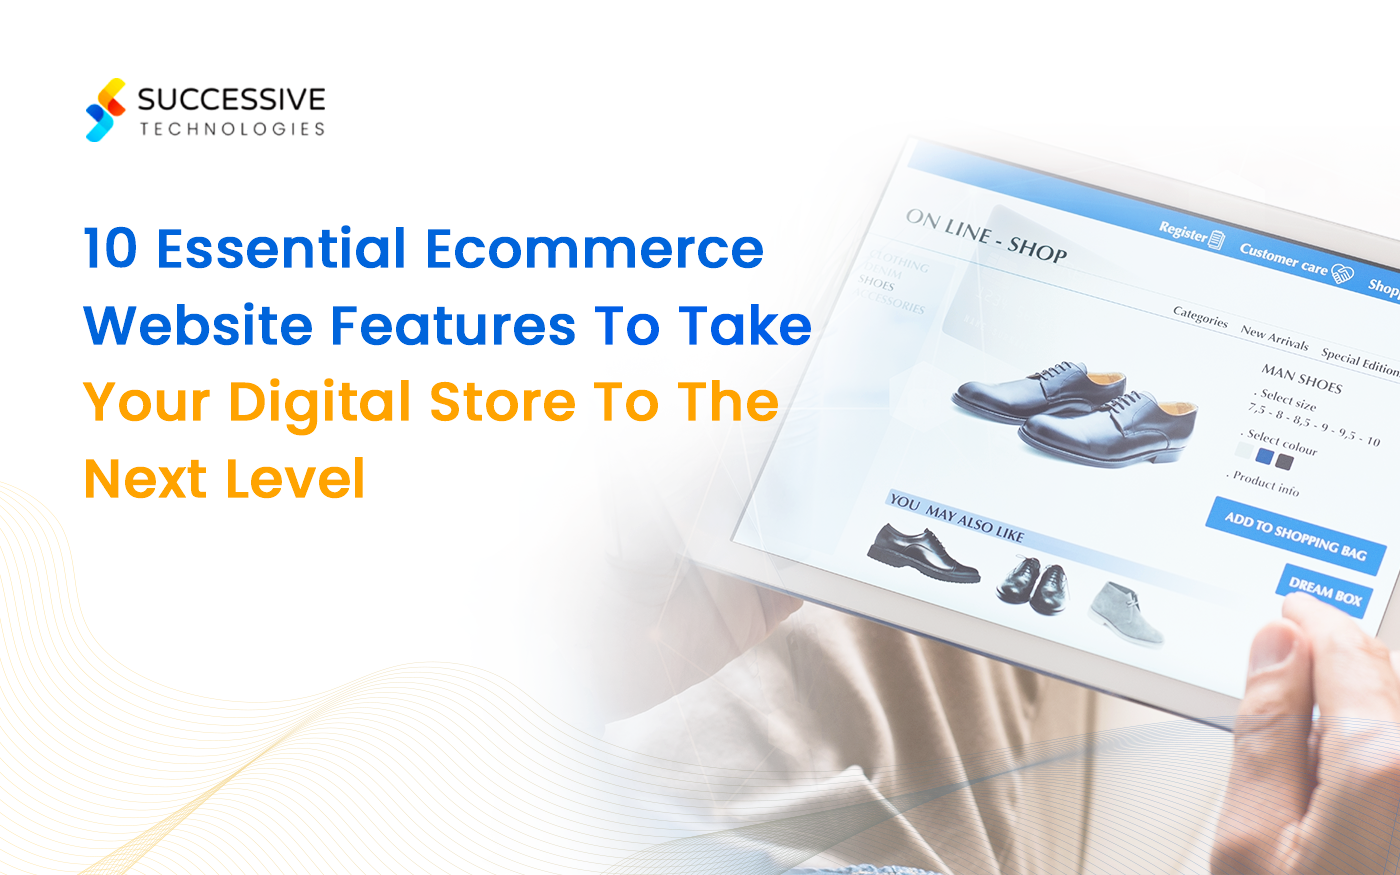 10 Essential Ecommerce Website Features To Take Your Digital Store To The Next Level